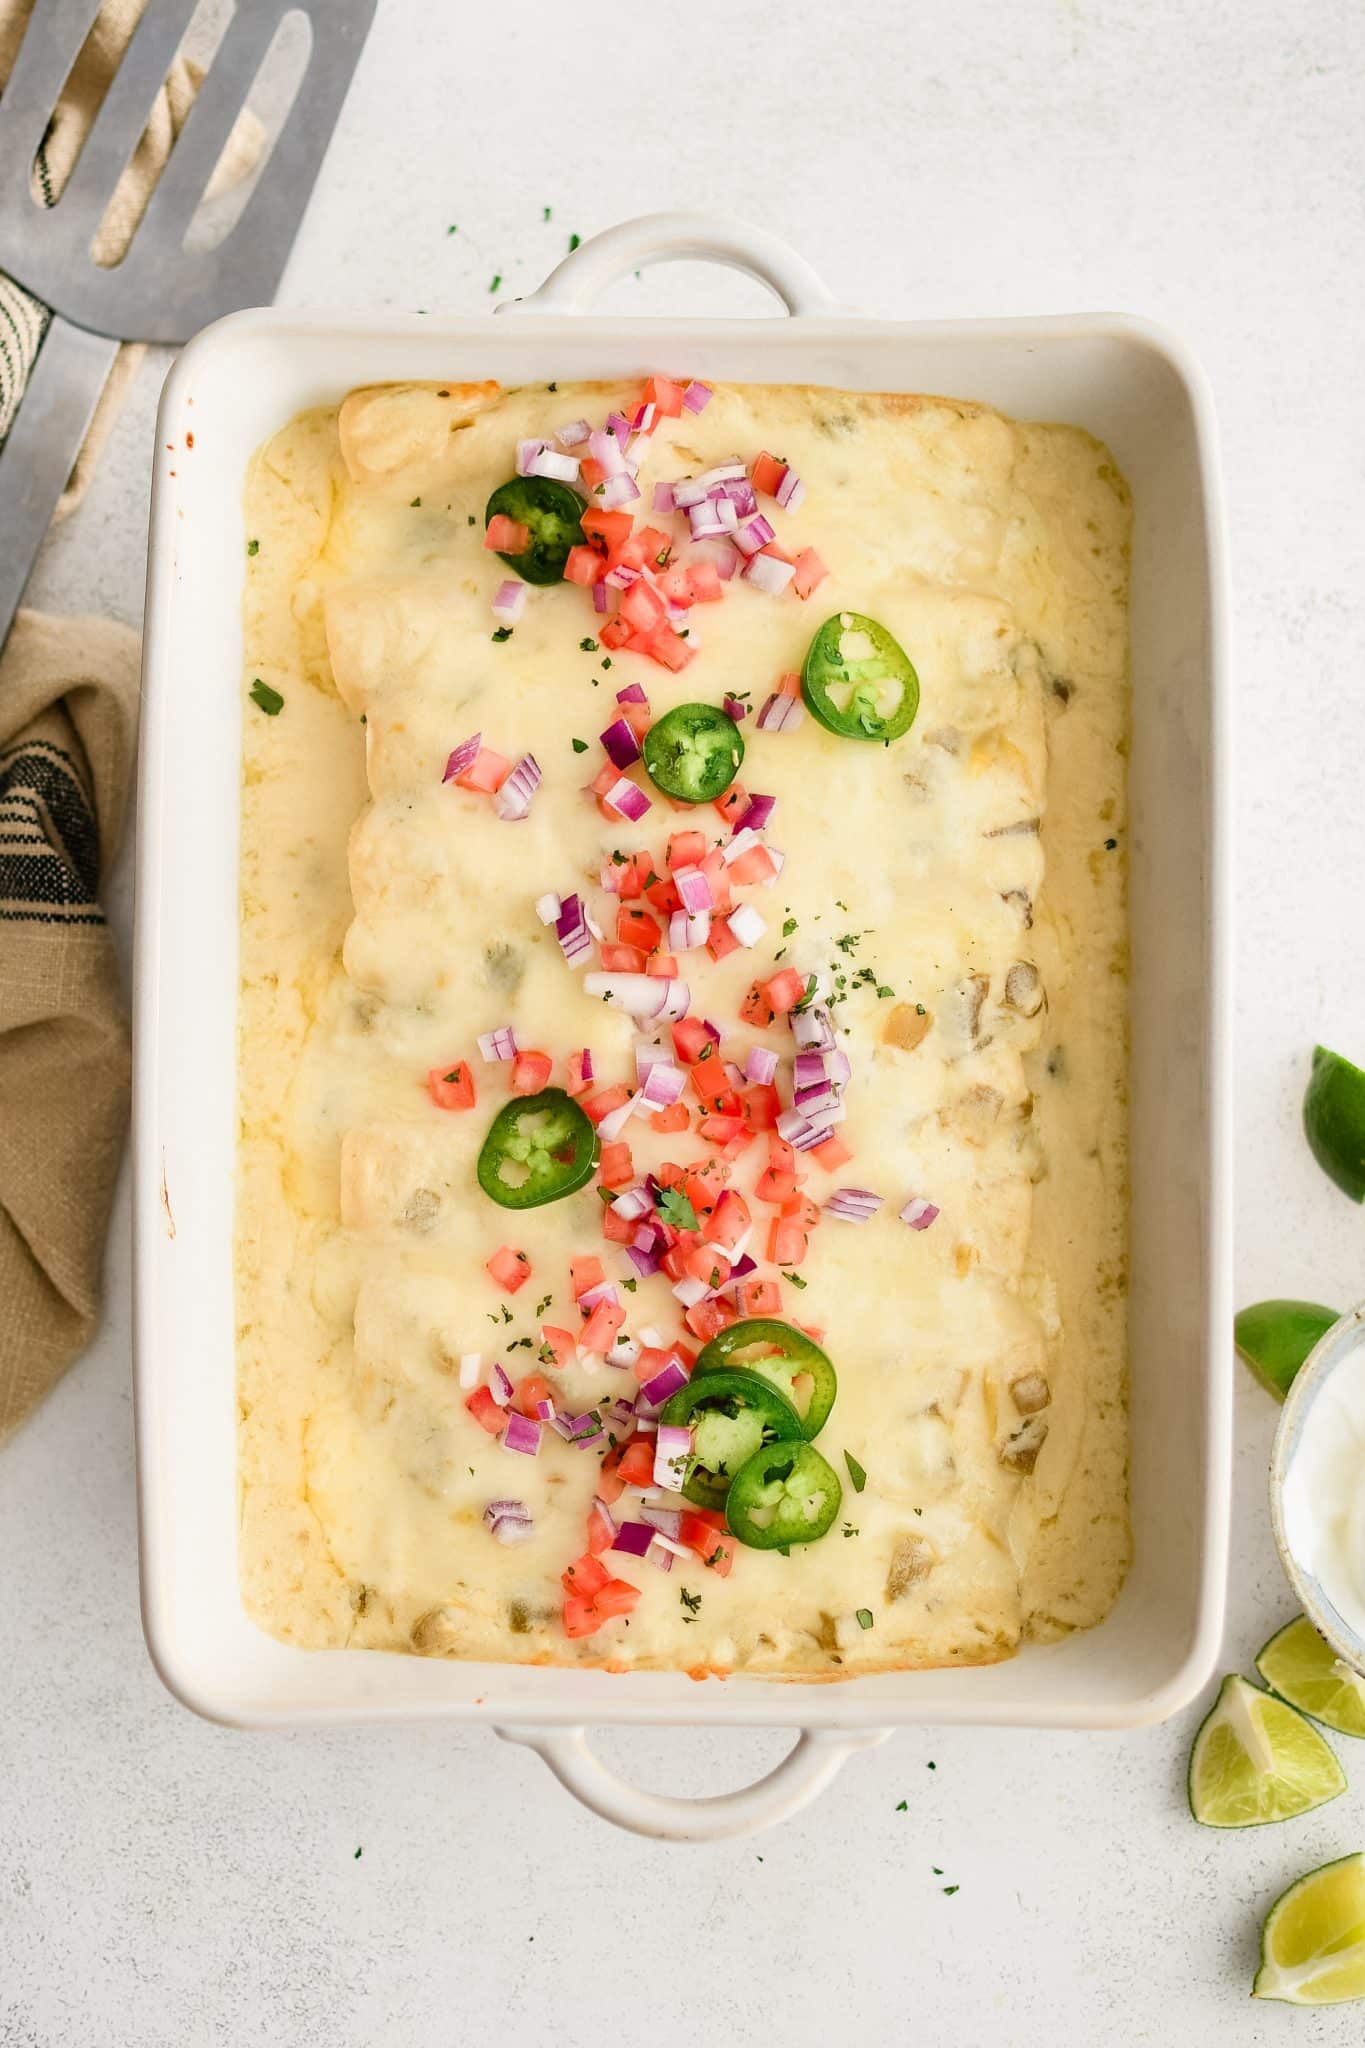 Large white casserole baking dish filled with sour cream enchiladas smothered in a creamy sour cream and cheese sauce and topped with diced red onion, diced tomatoes, and sliced jalapenos.